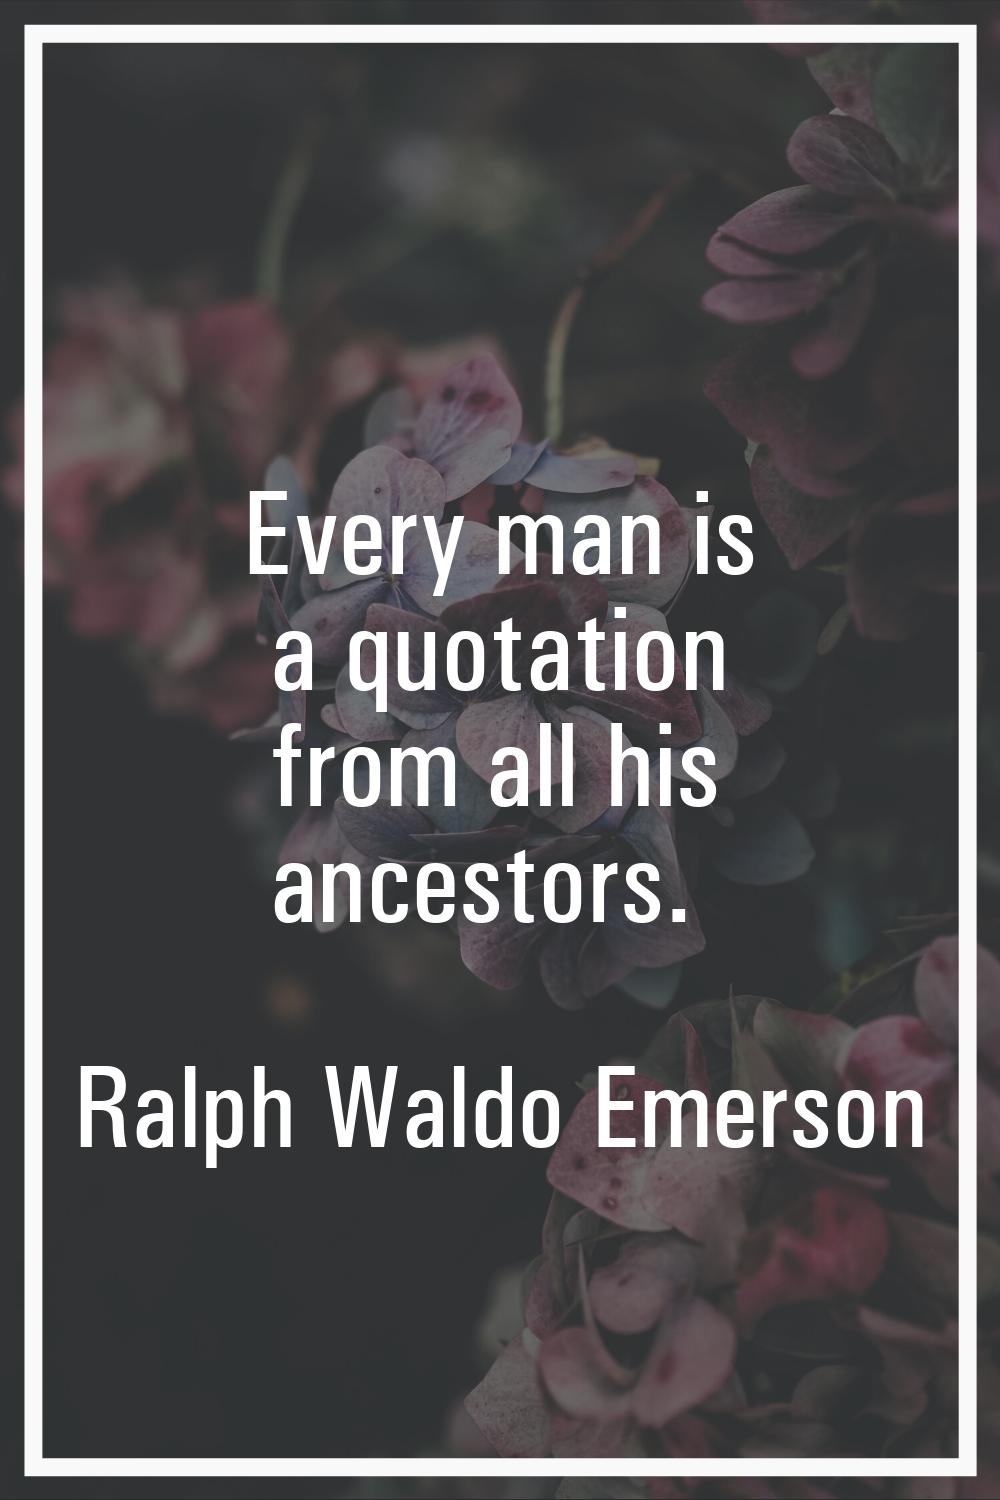 Every man is a quotation from all his ancestors.